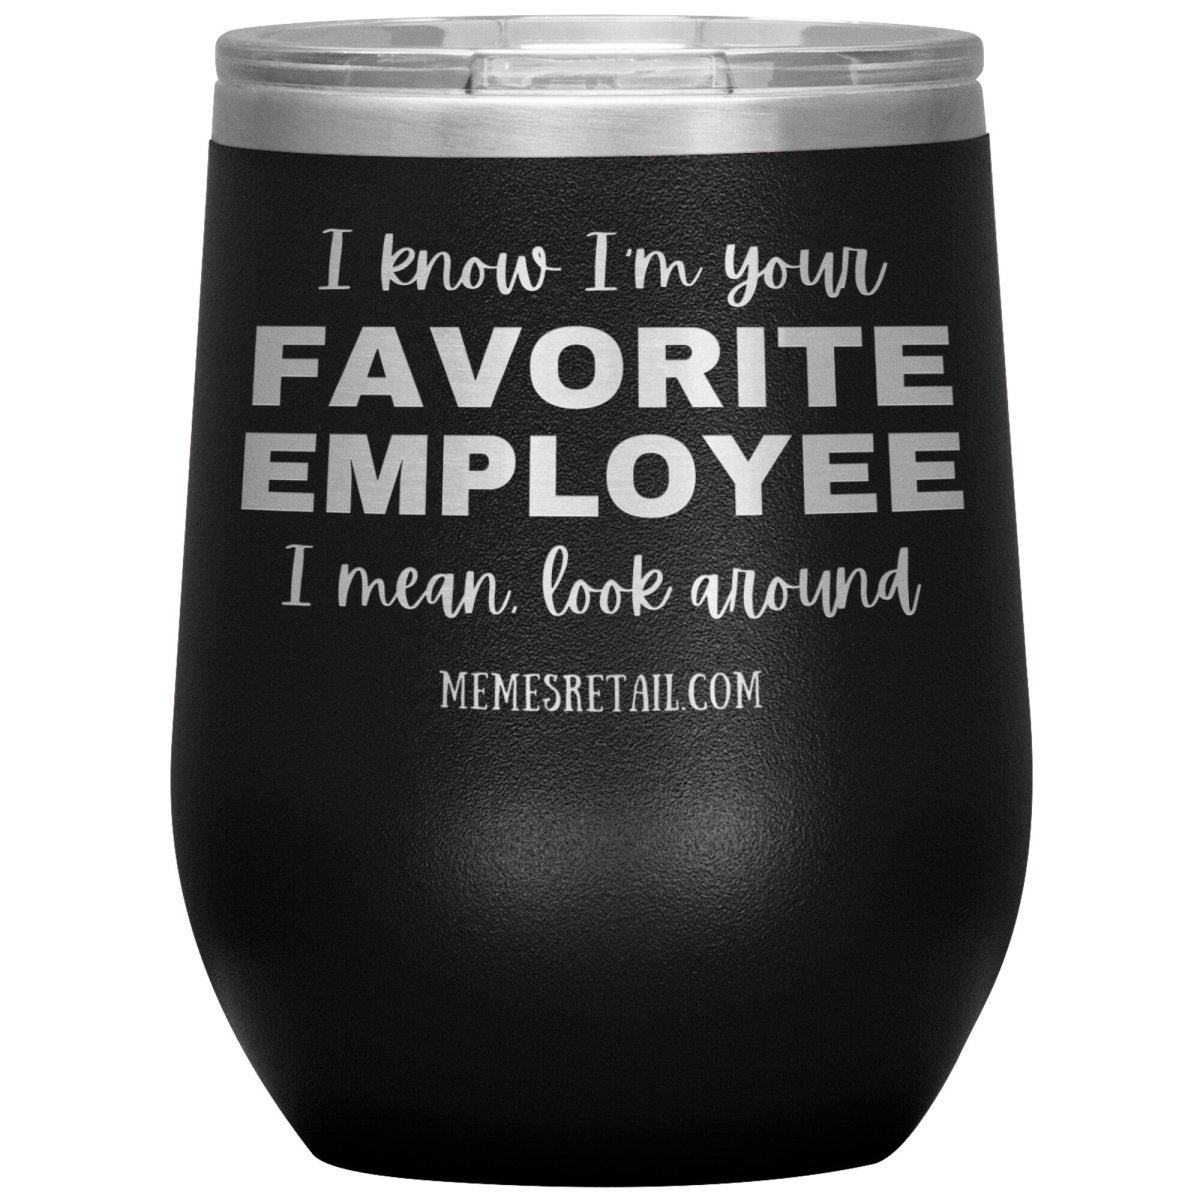 I know I’m your favorite employee, I mean look around, 12oz Wine Insulated Tumbler / Black - MemesRetail.com